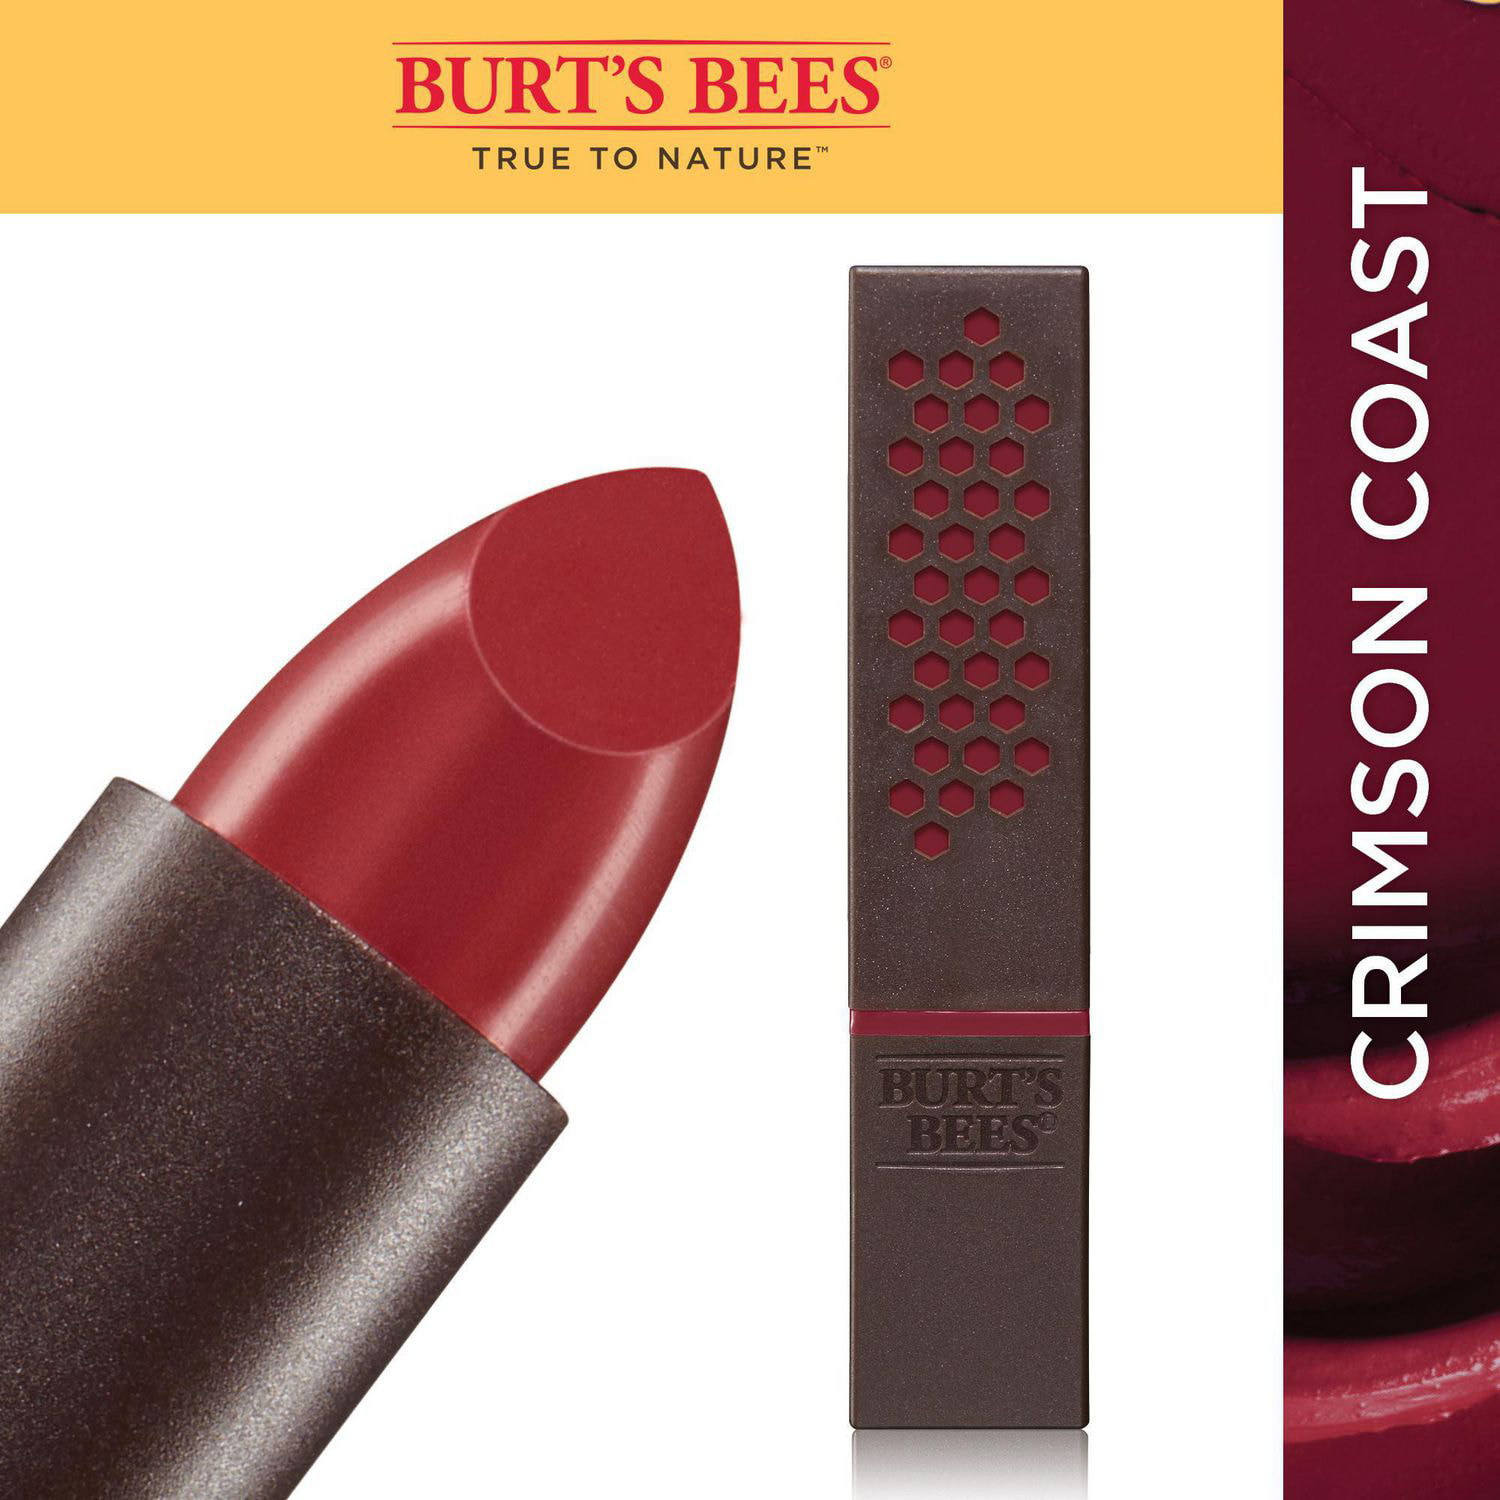 The Burt's Bees Lipstick is seriously moisturizing and gorgeous